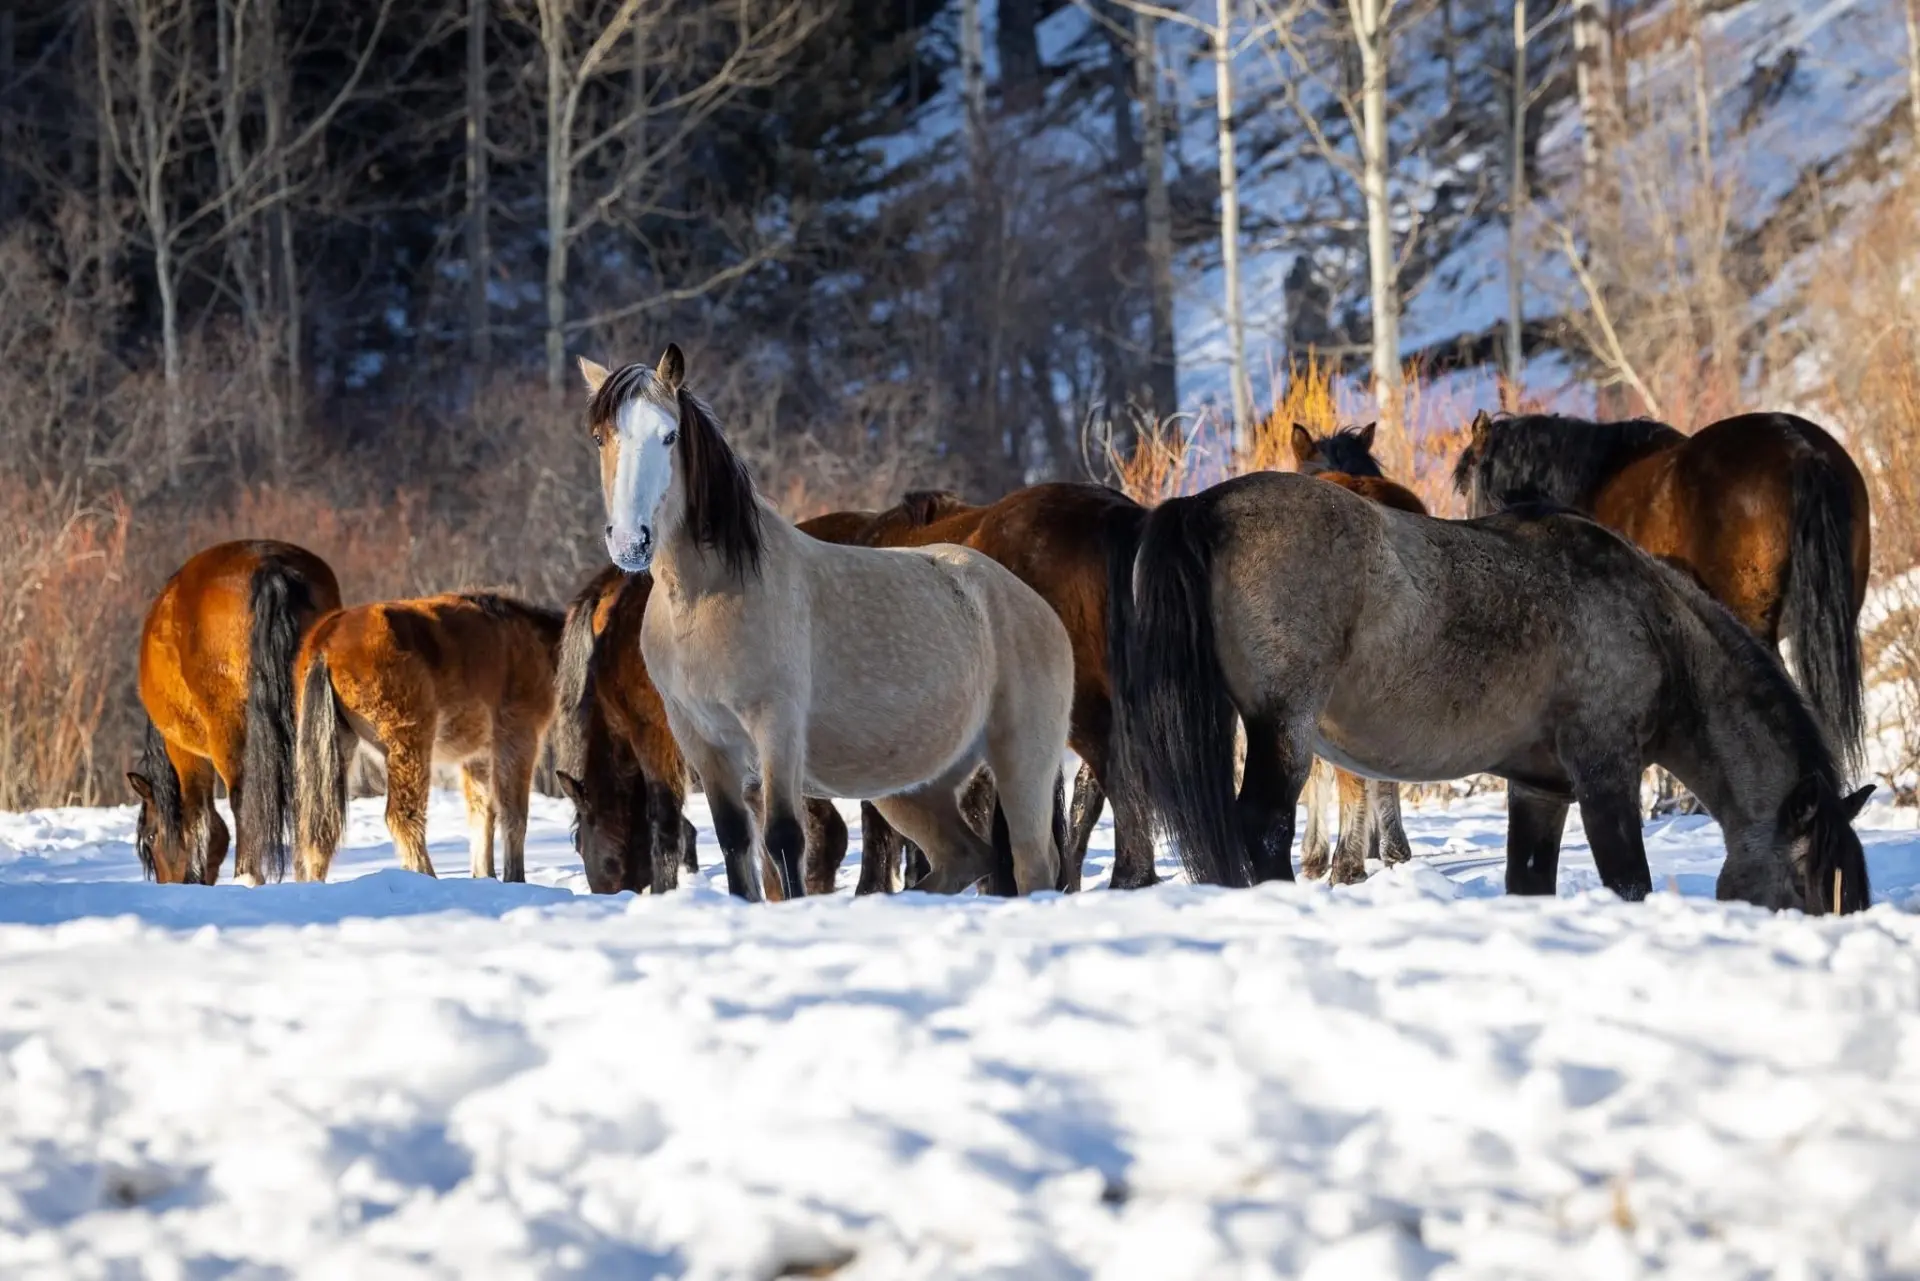 Wild horses of Canada: How they survive harsh weather conditions